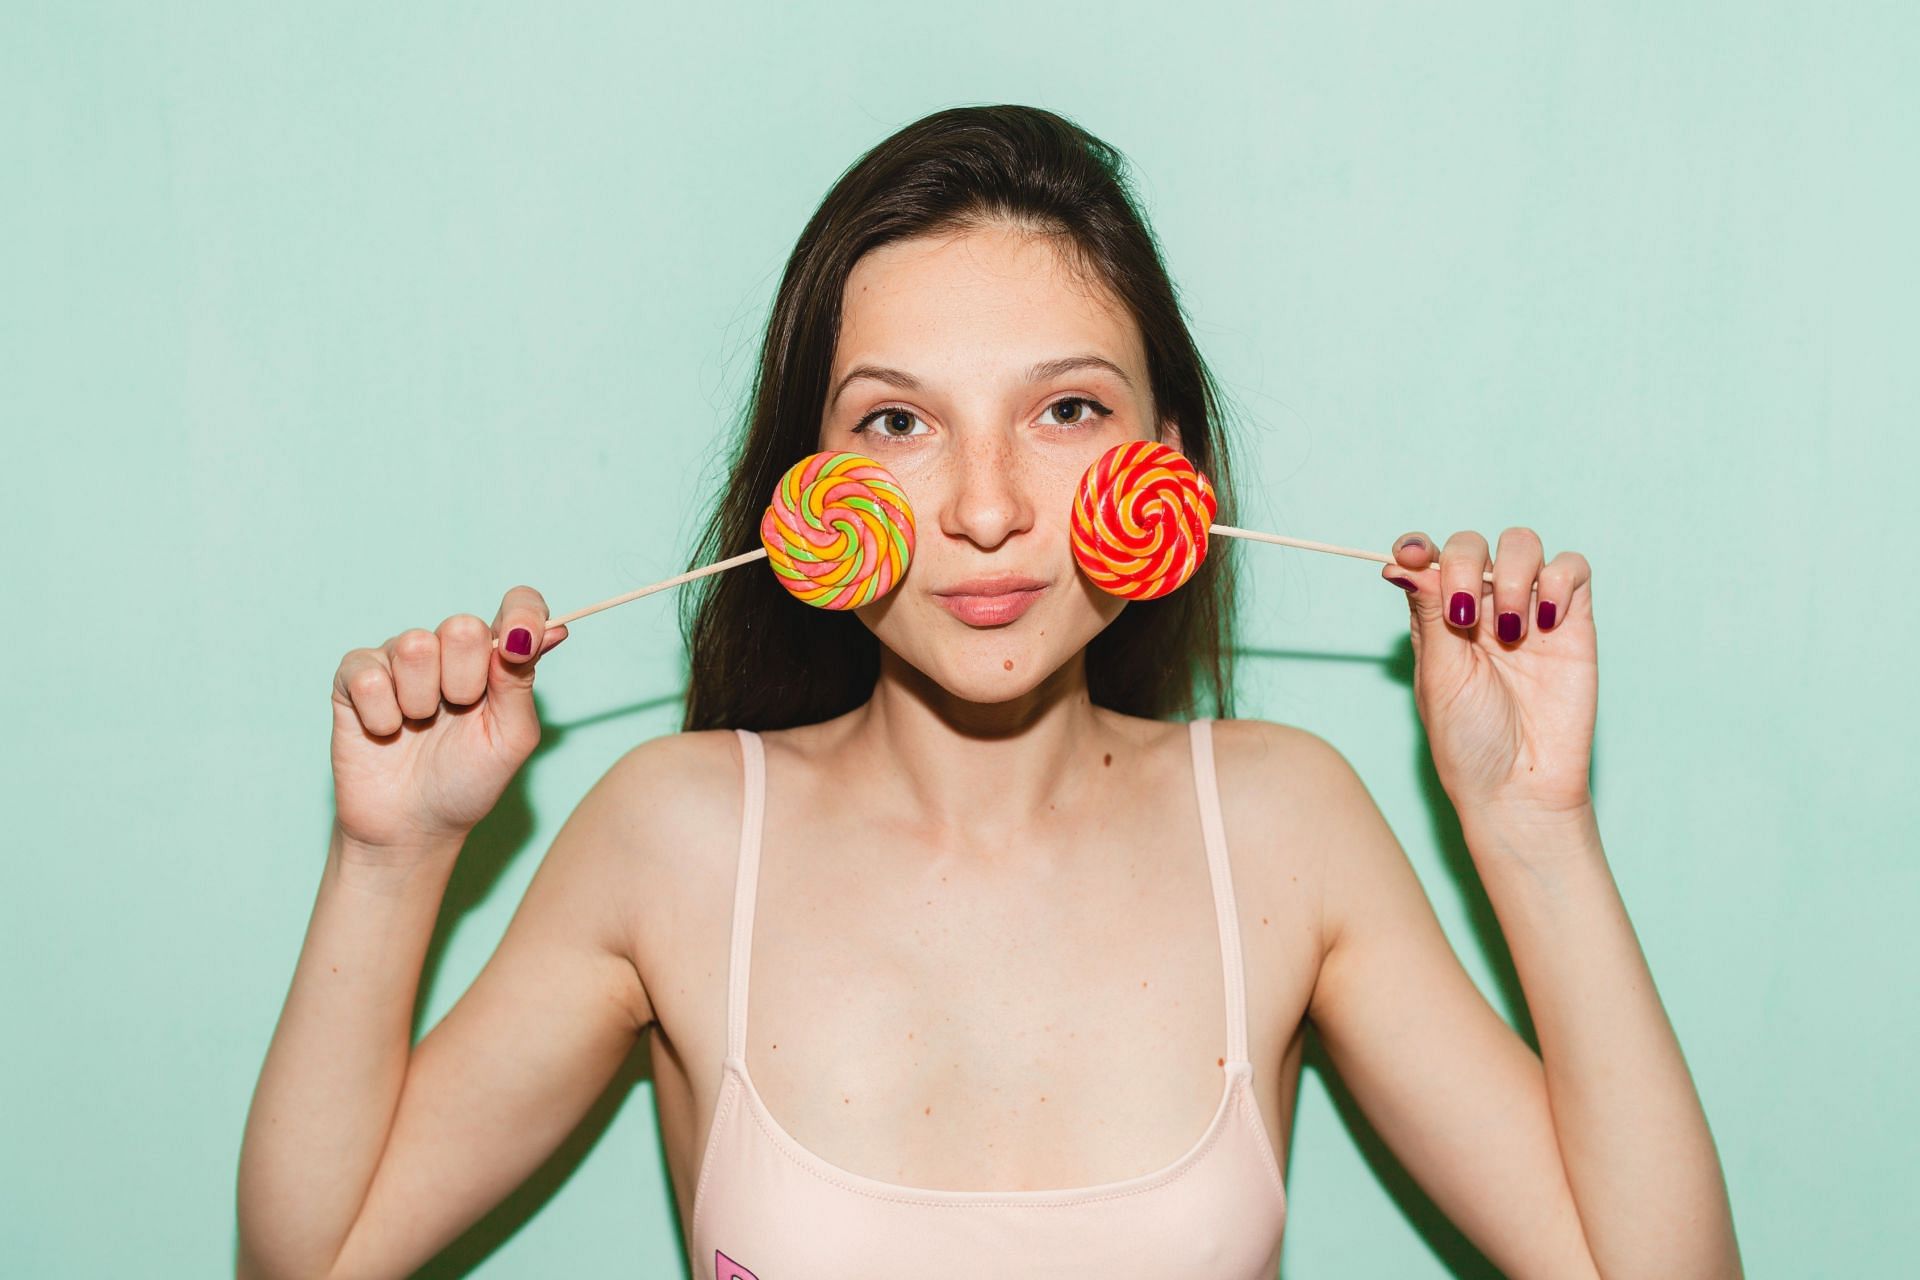 Sour candy for anxiety is not recommended for someone with physical health concerns. (Image via Vecteezy/Mariia Markevych)